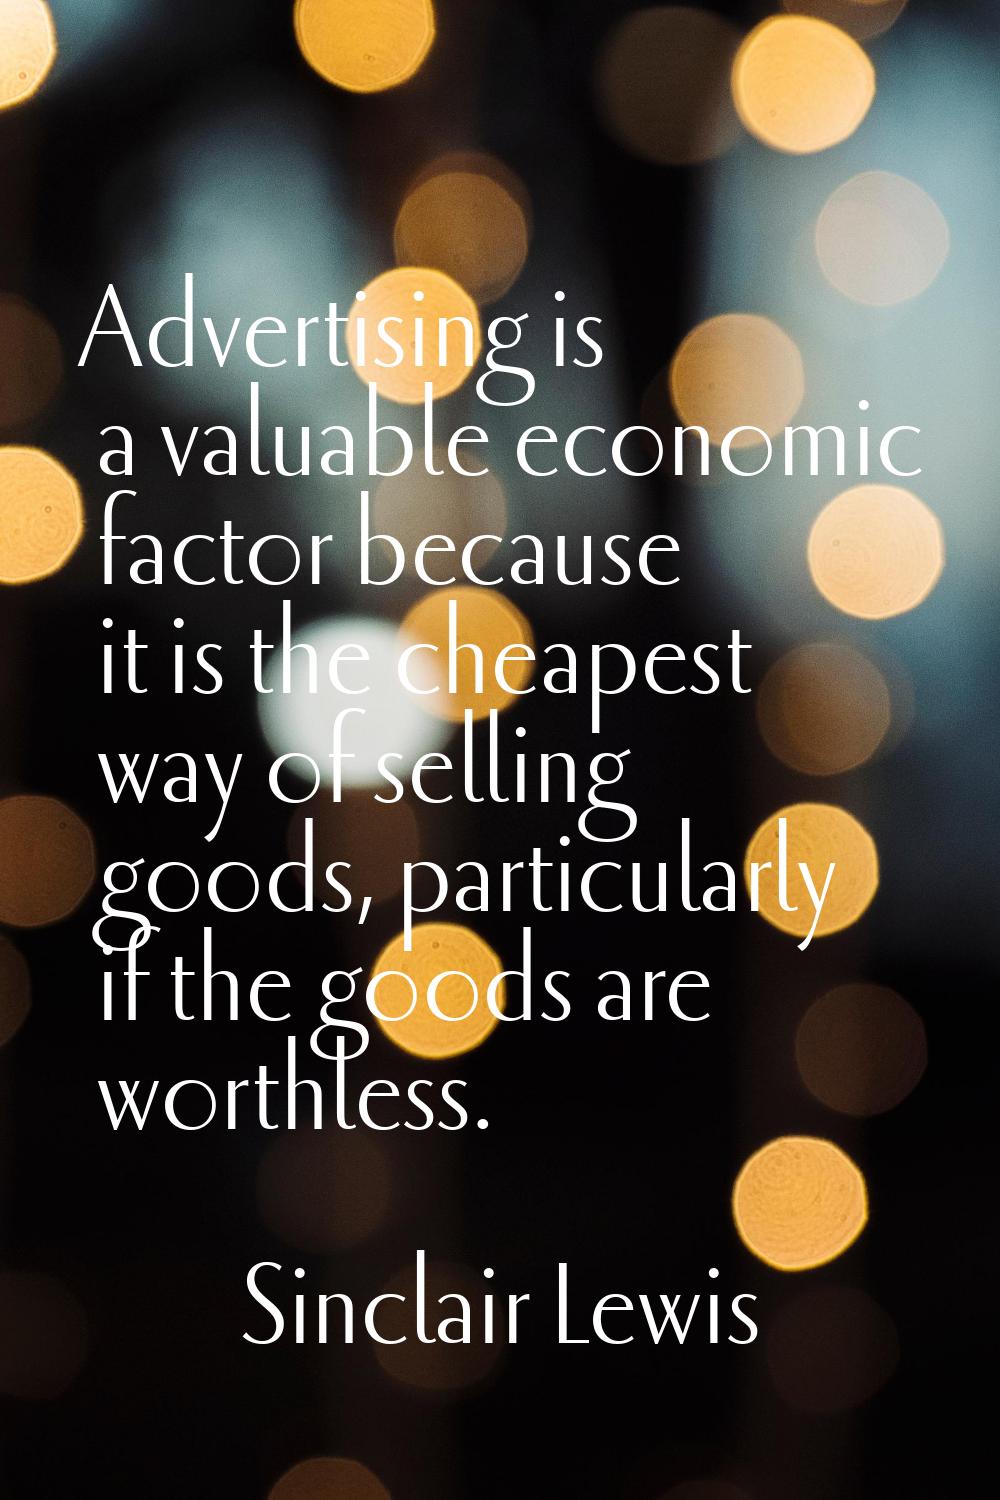 Advertising is a valuable economic factor because it is the cheapest way of selling goods, particul